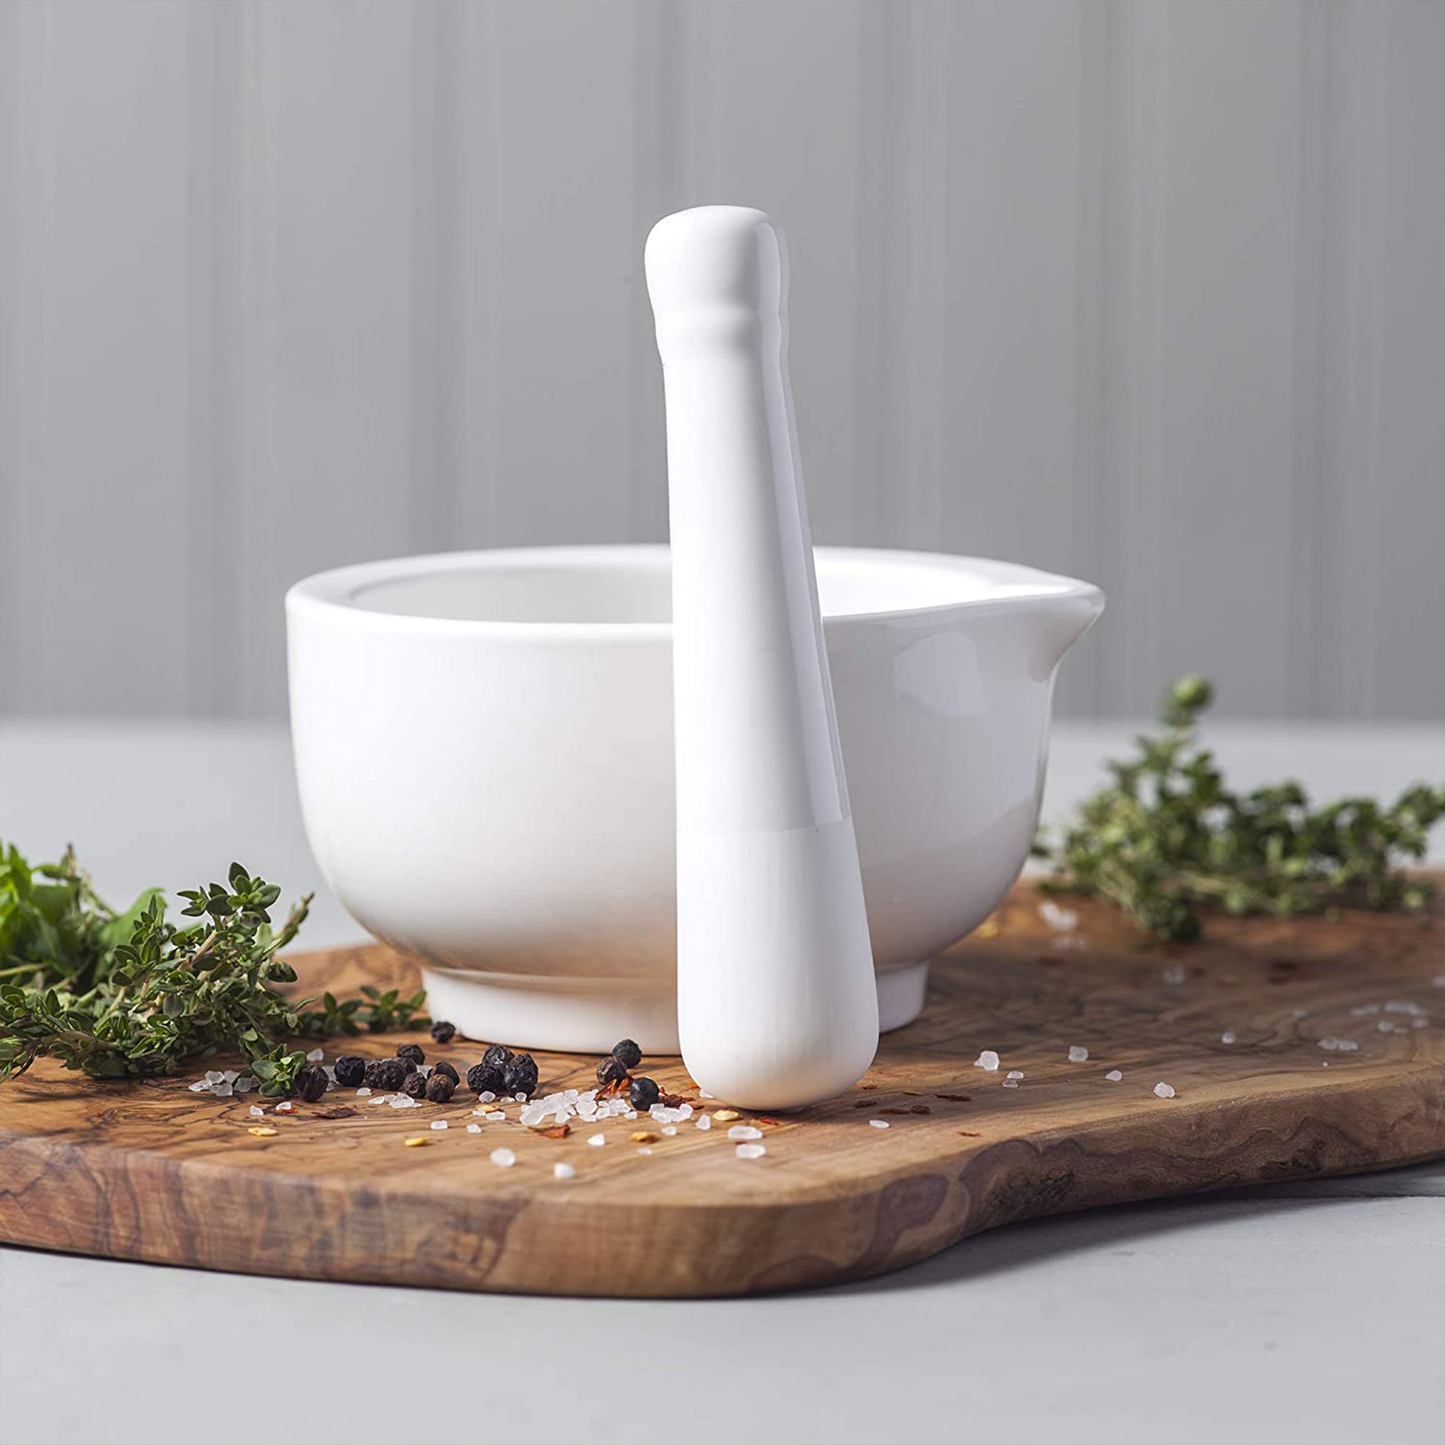 the morar and pestle on a seving board with fresh herbs and seasonings